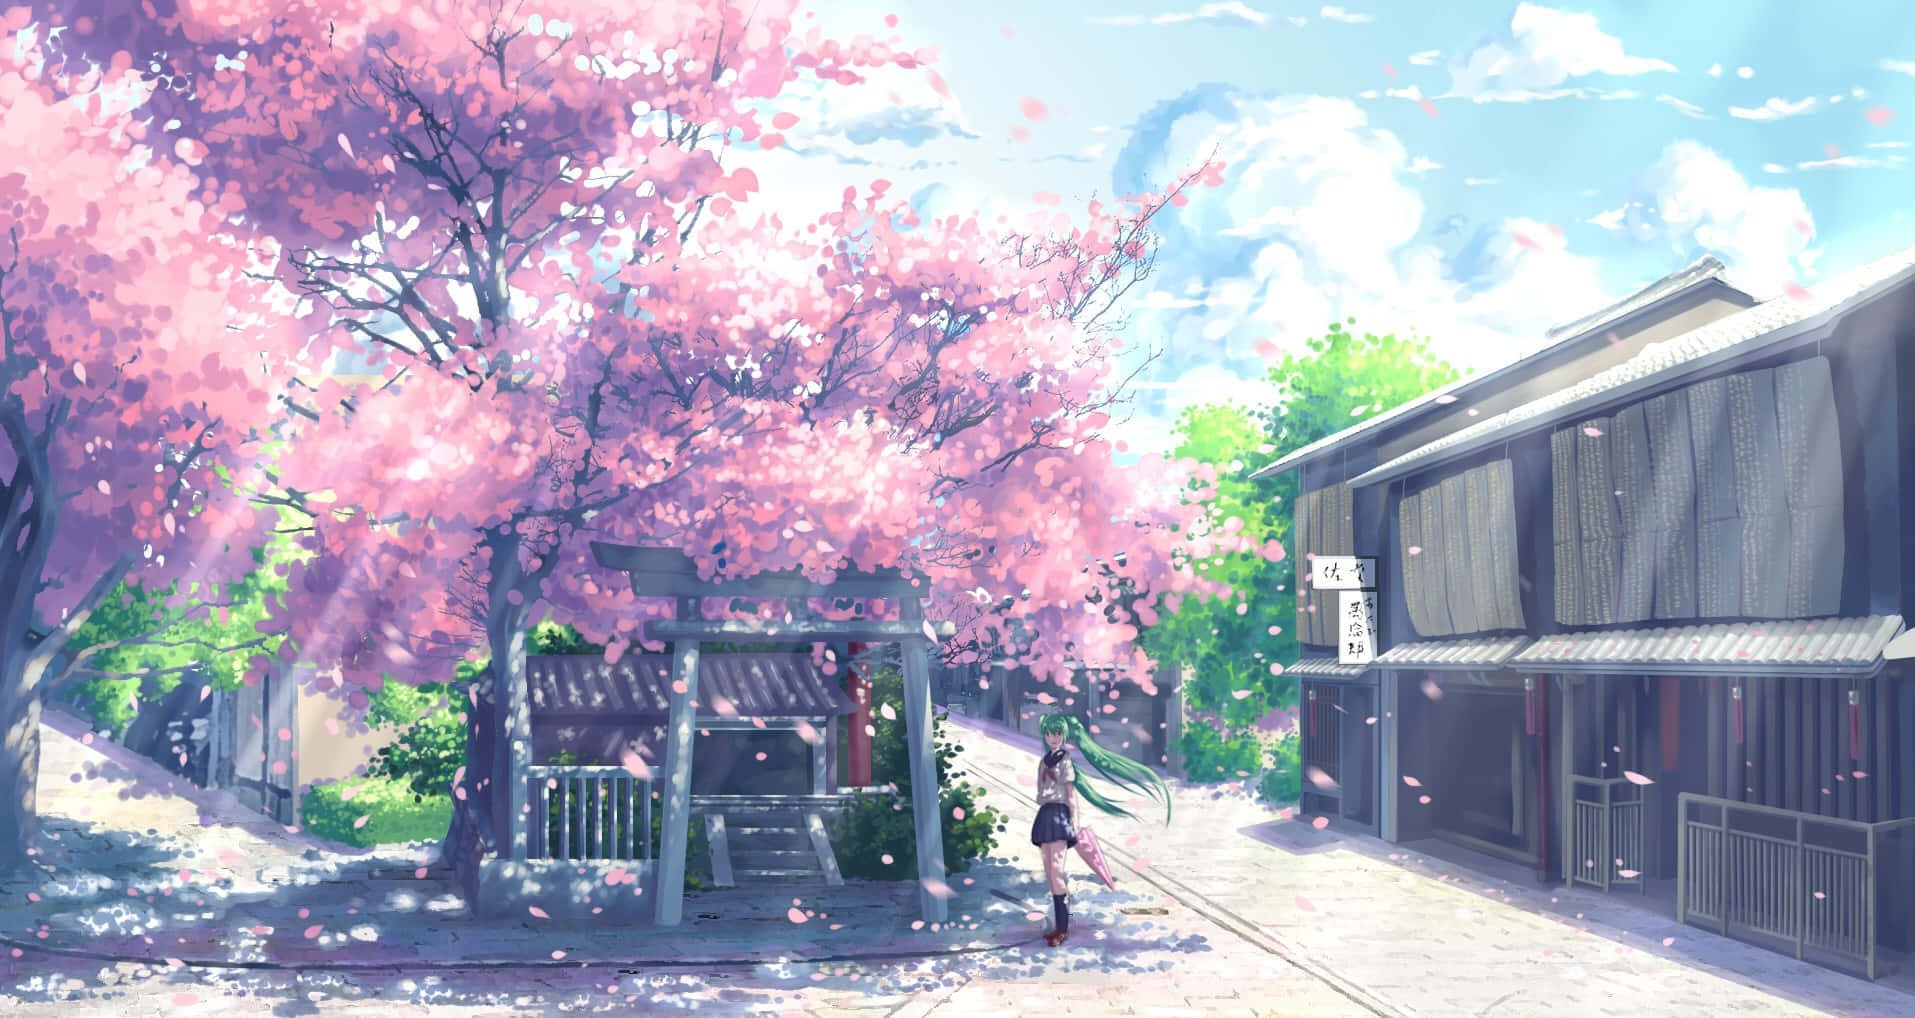 A Street With Pink Blossoms And A House